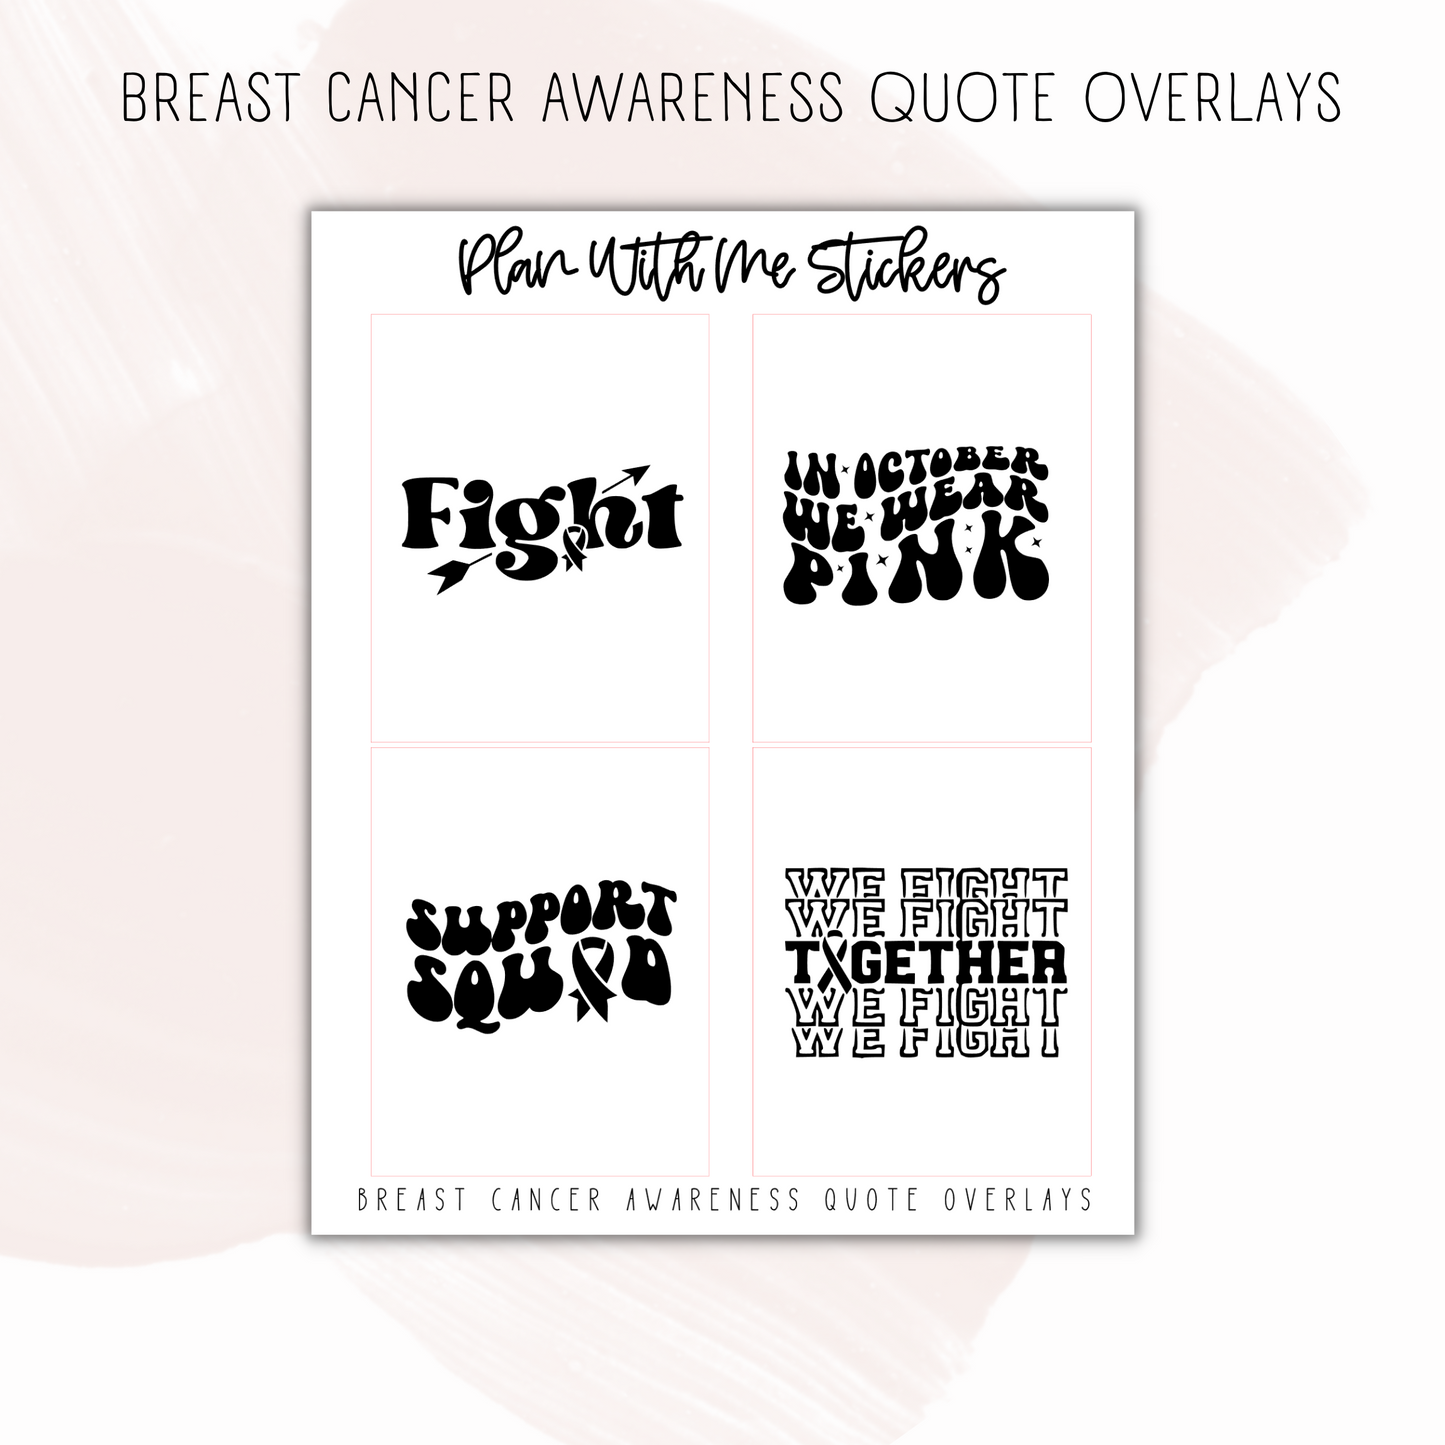 Breast Cancer Awareness Quote Overlays